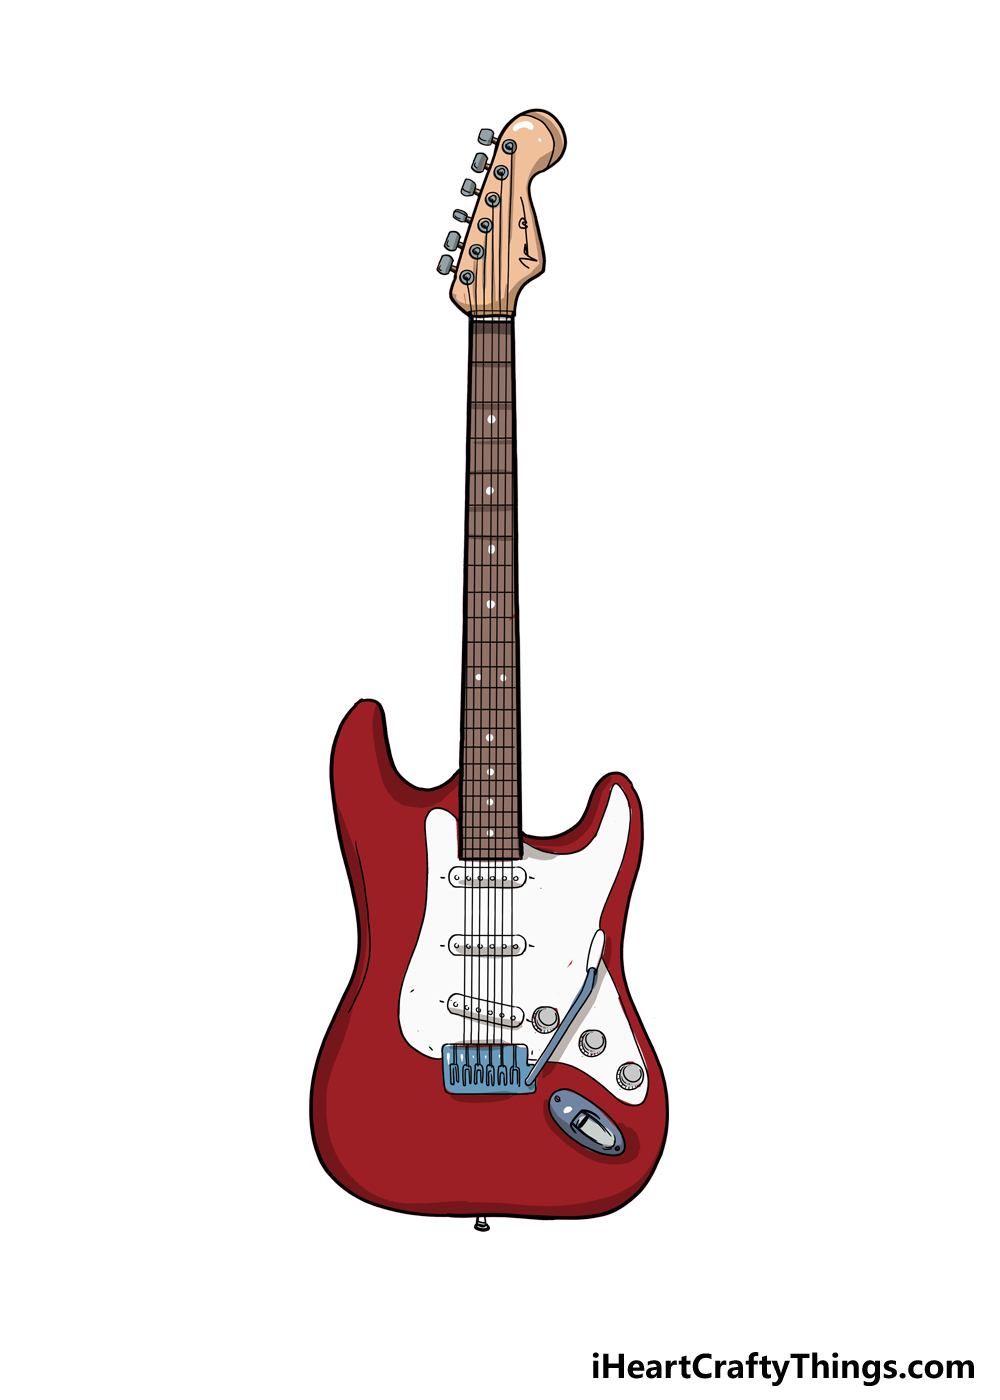 How To Draw An Electric Guitar A Step By Step Guide I Heart Crafty